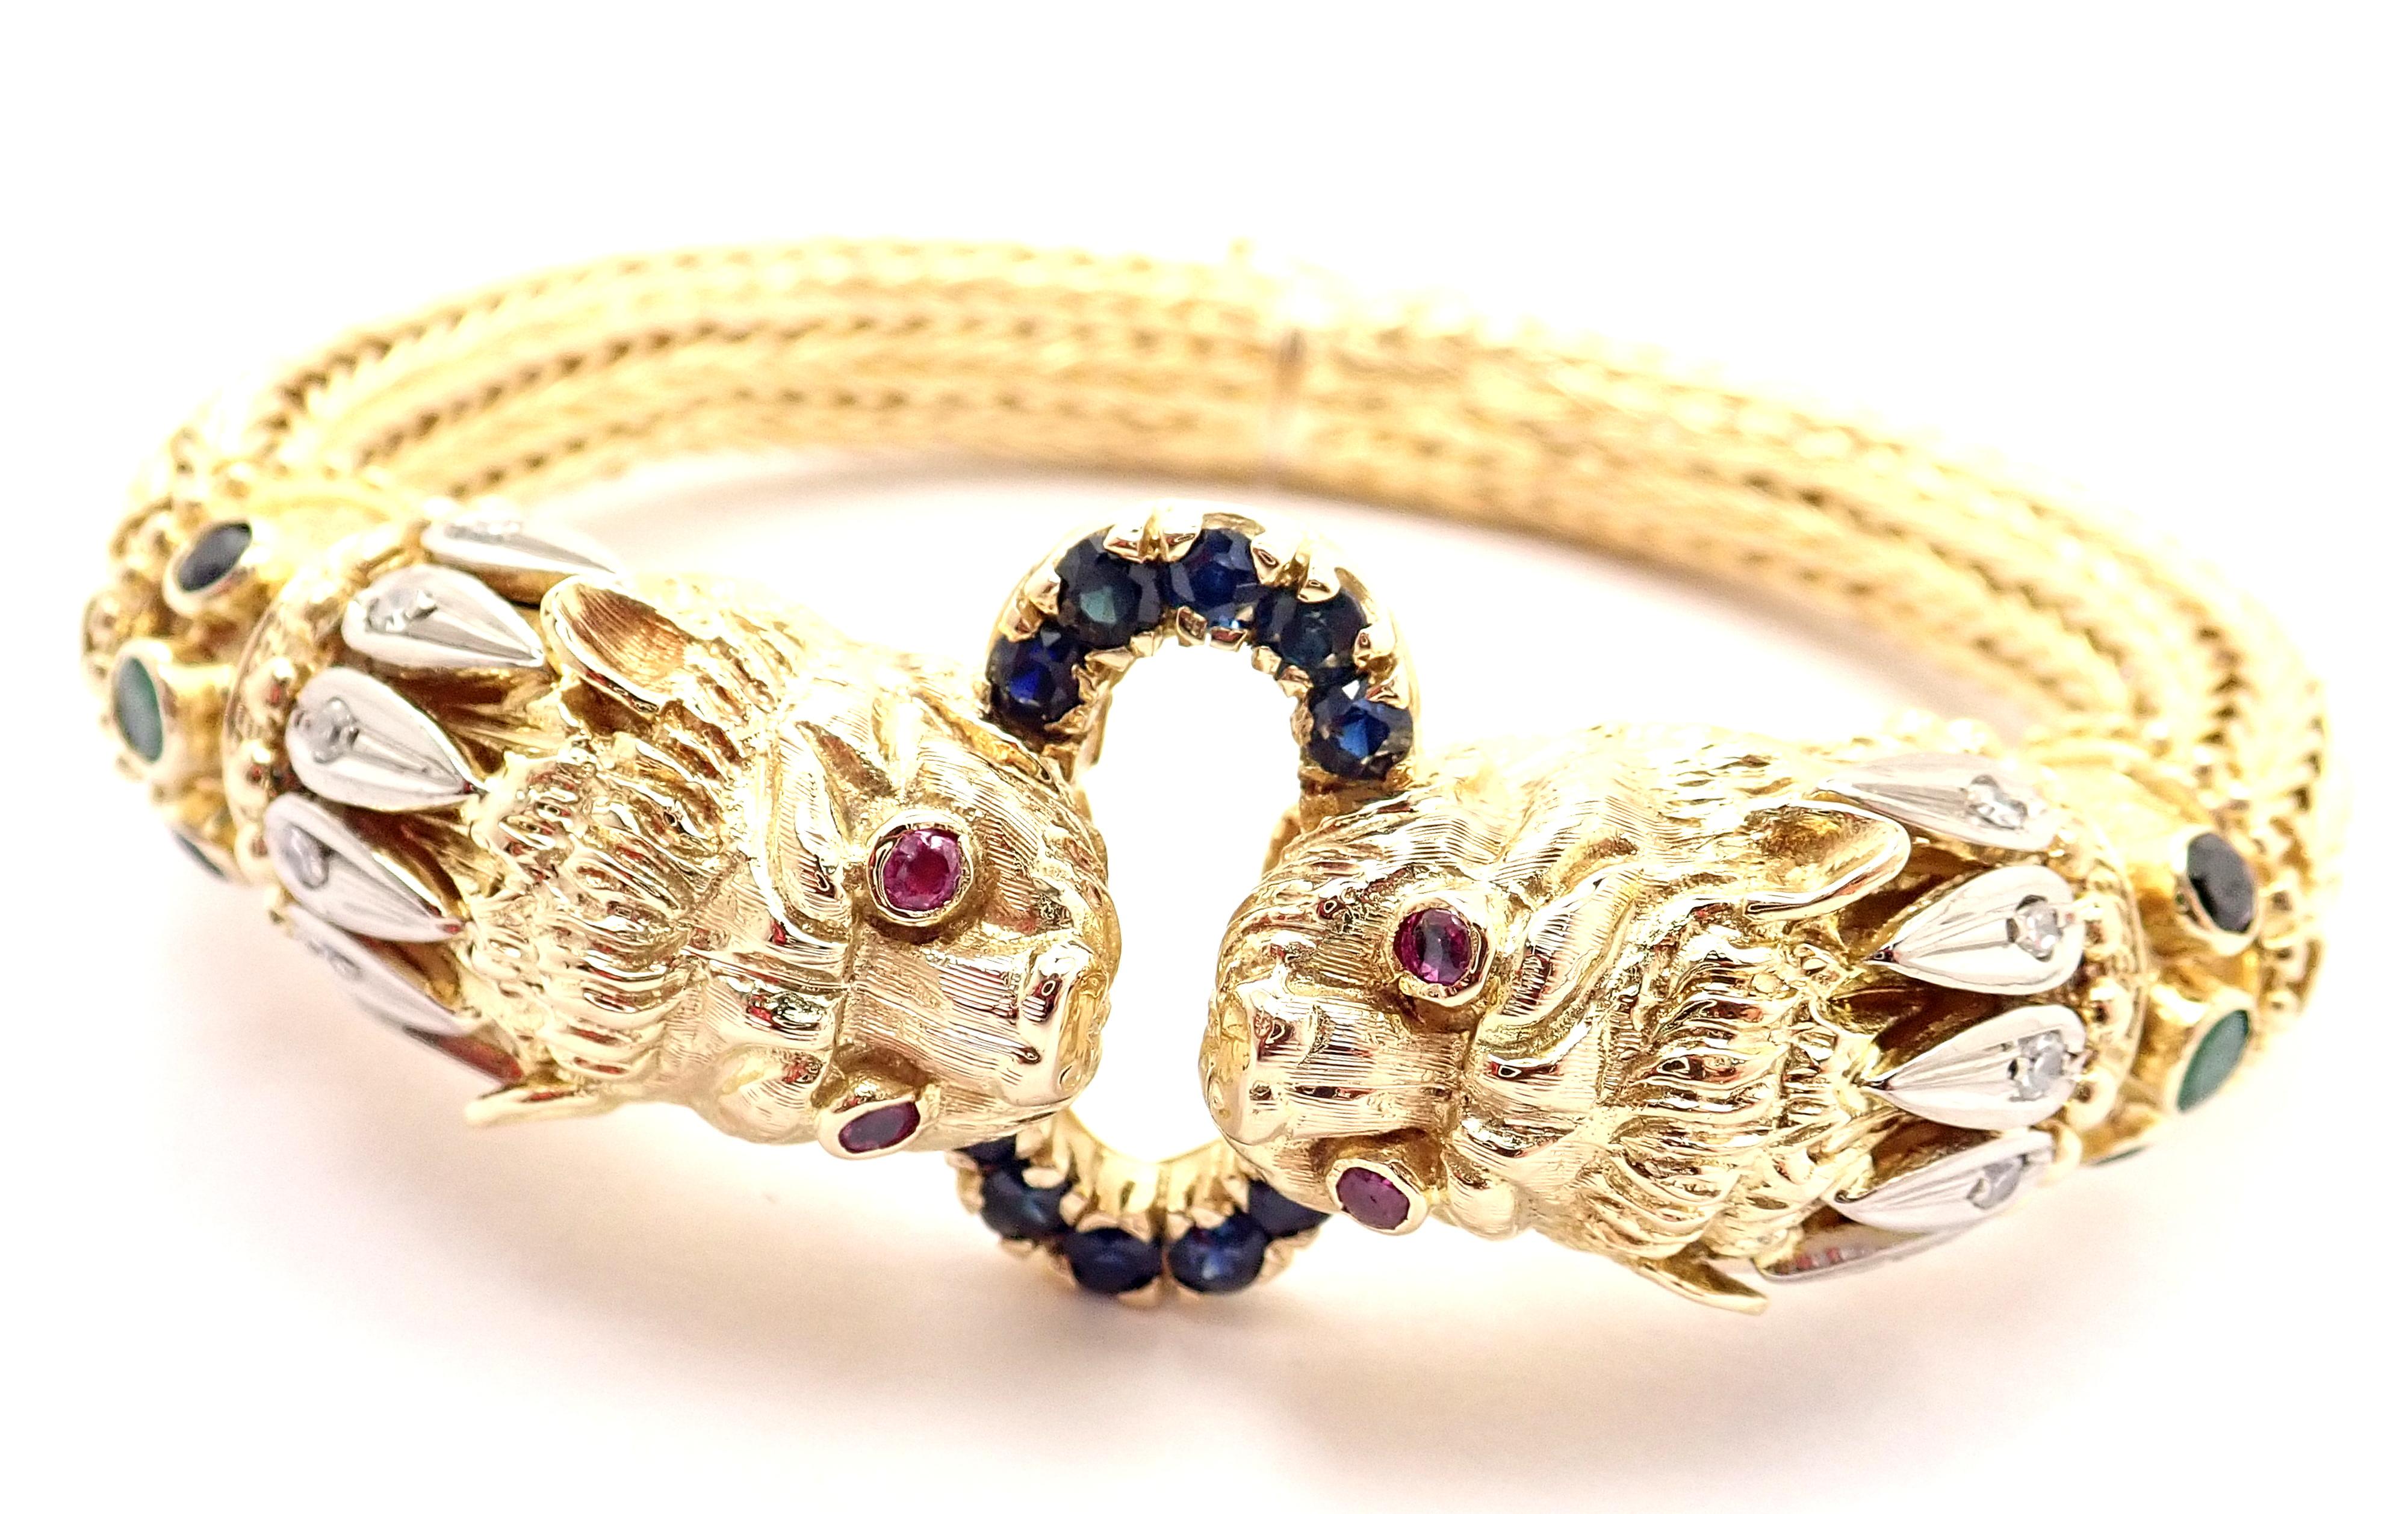 18k Yellow Diamond Ruby Sapphire Chimera Bangle Bracelet by Ilias LaLaounis. 
Made in Greece. 
With 12 round brilliant cut diamonds 
14 round sapphires
4 rubies
2 emeralds
Details: 
Length: Fits 7